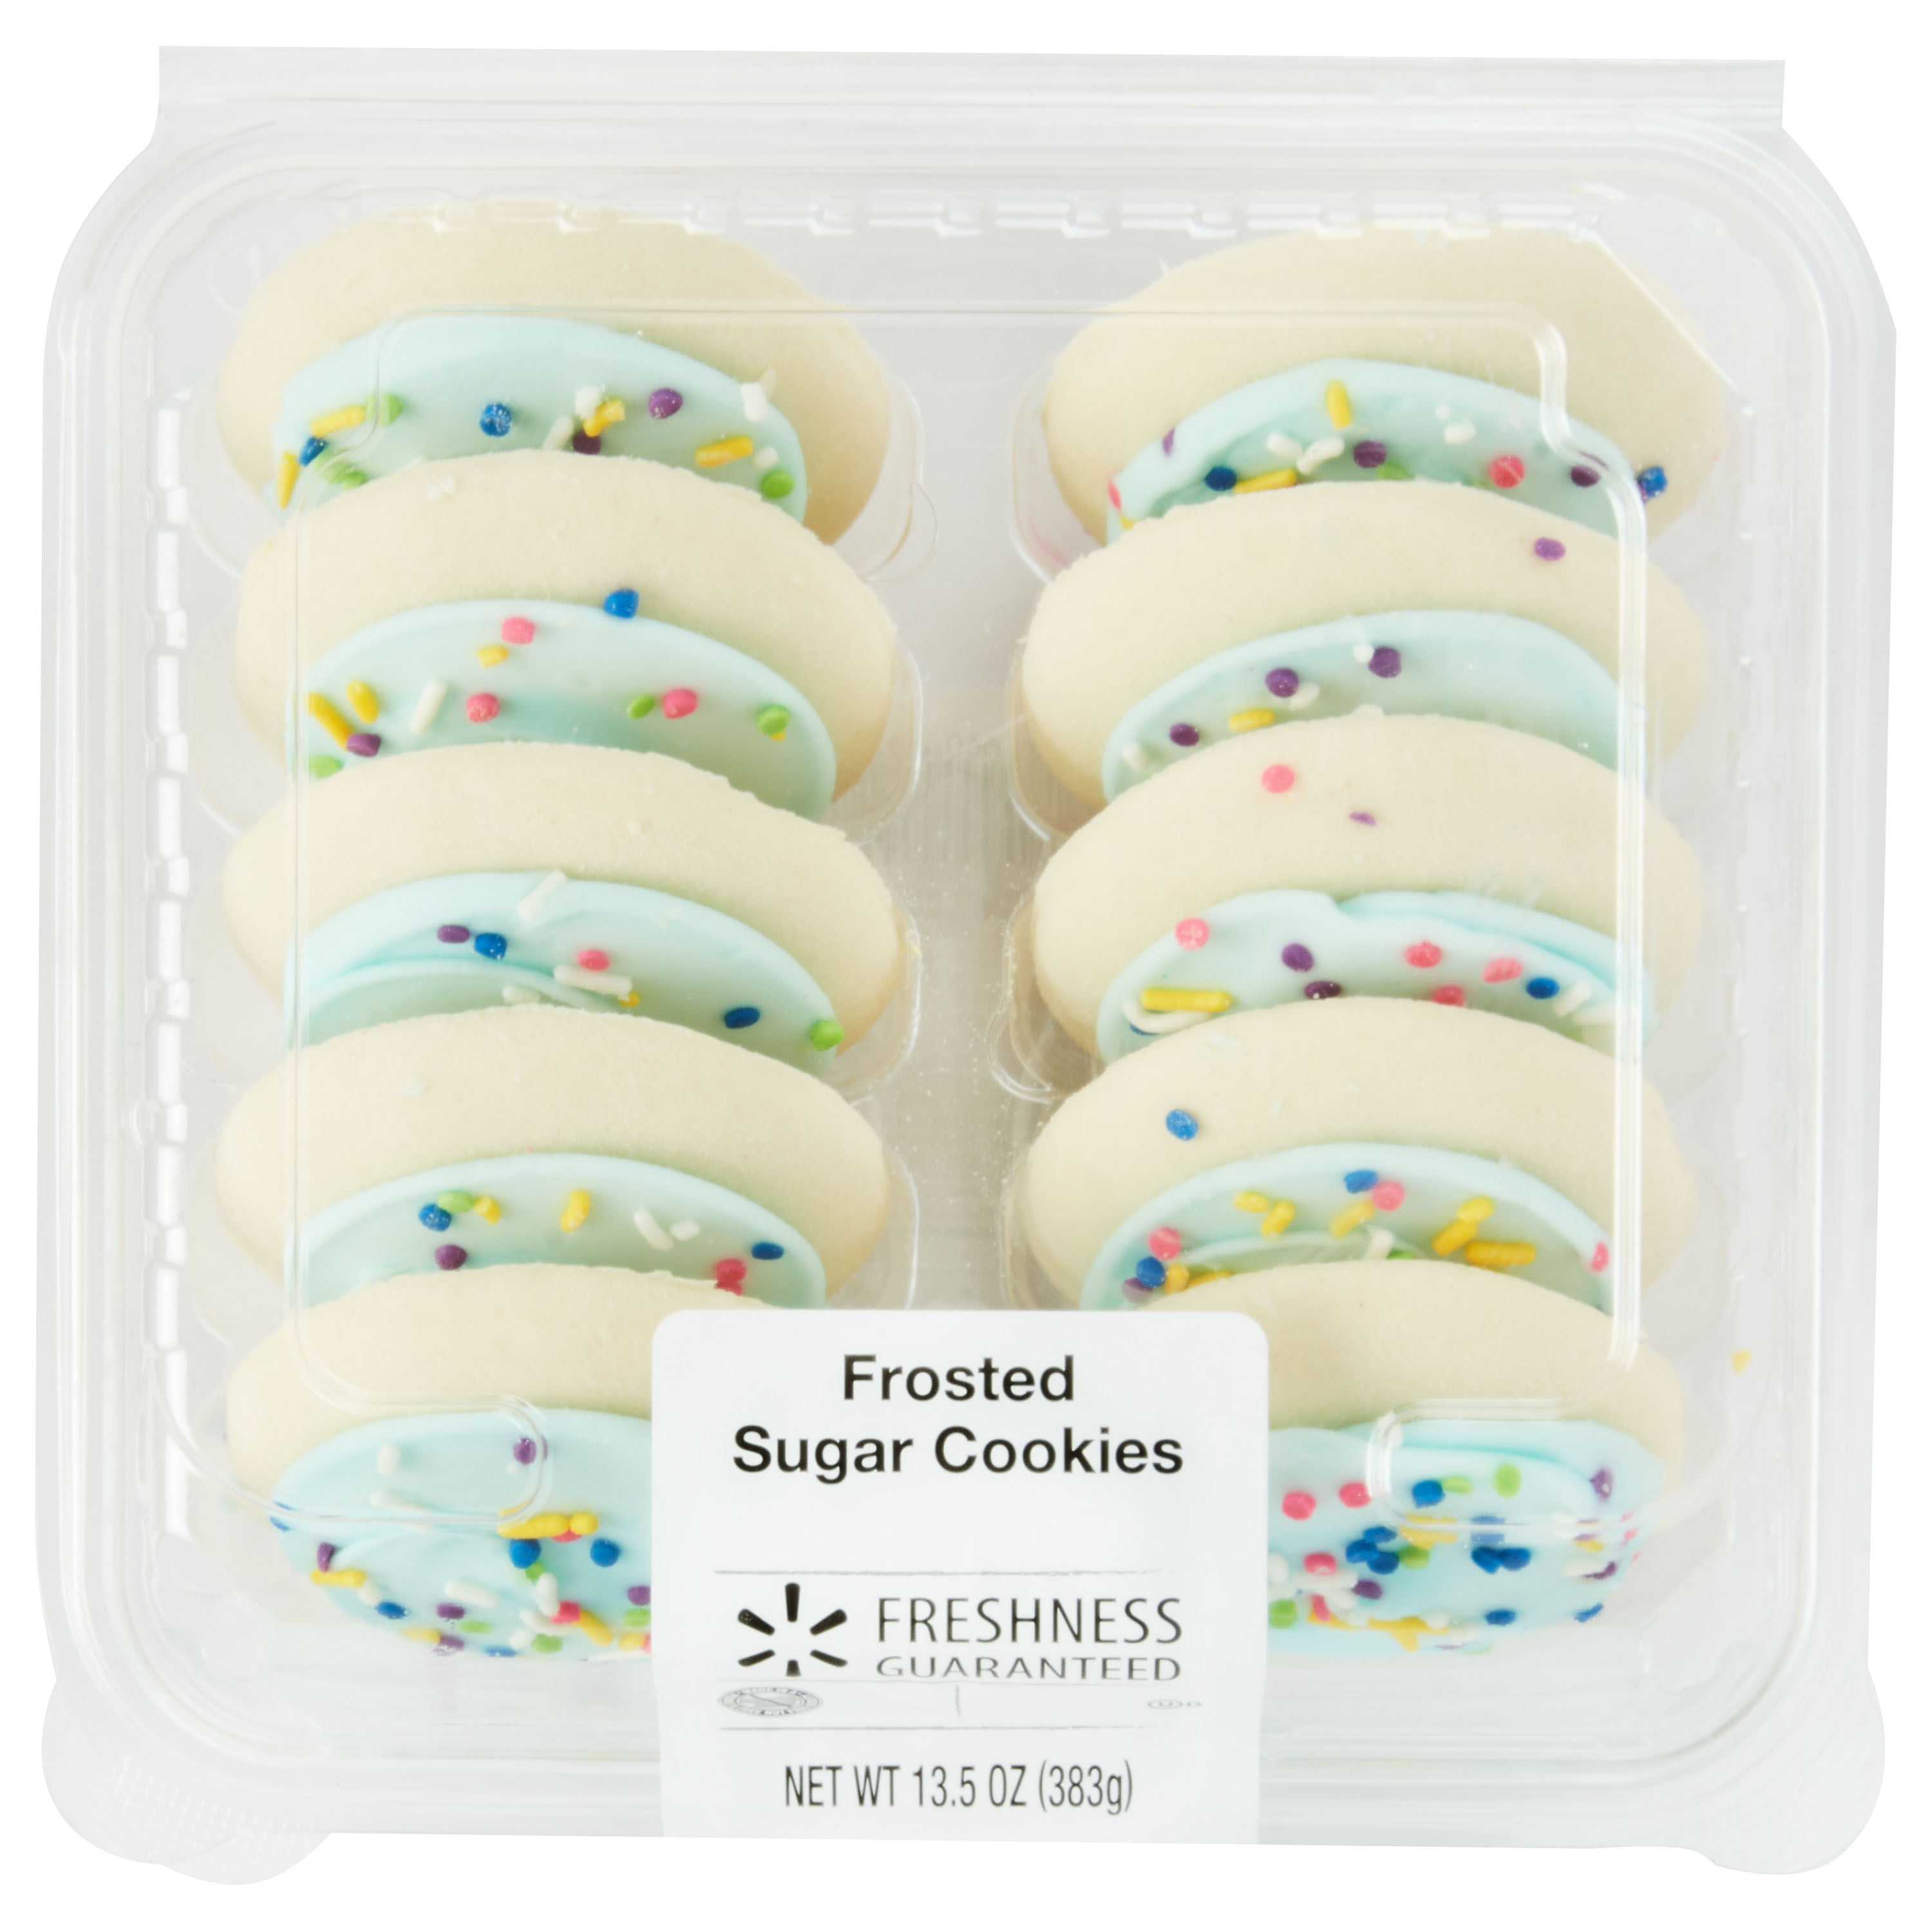 Freshness Guaranteed Frosted Sugar Cookies 13 5 Oz 10 Count